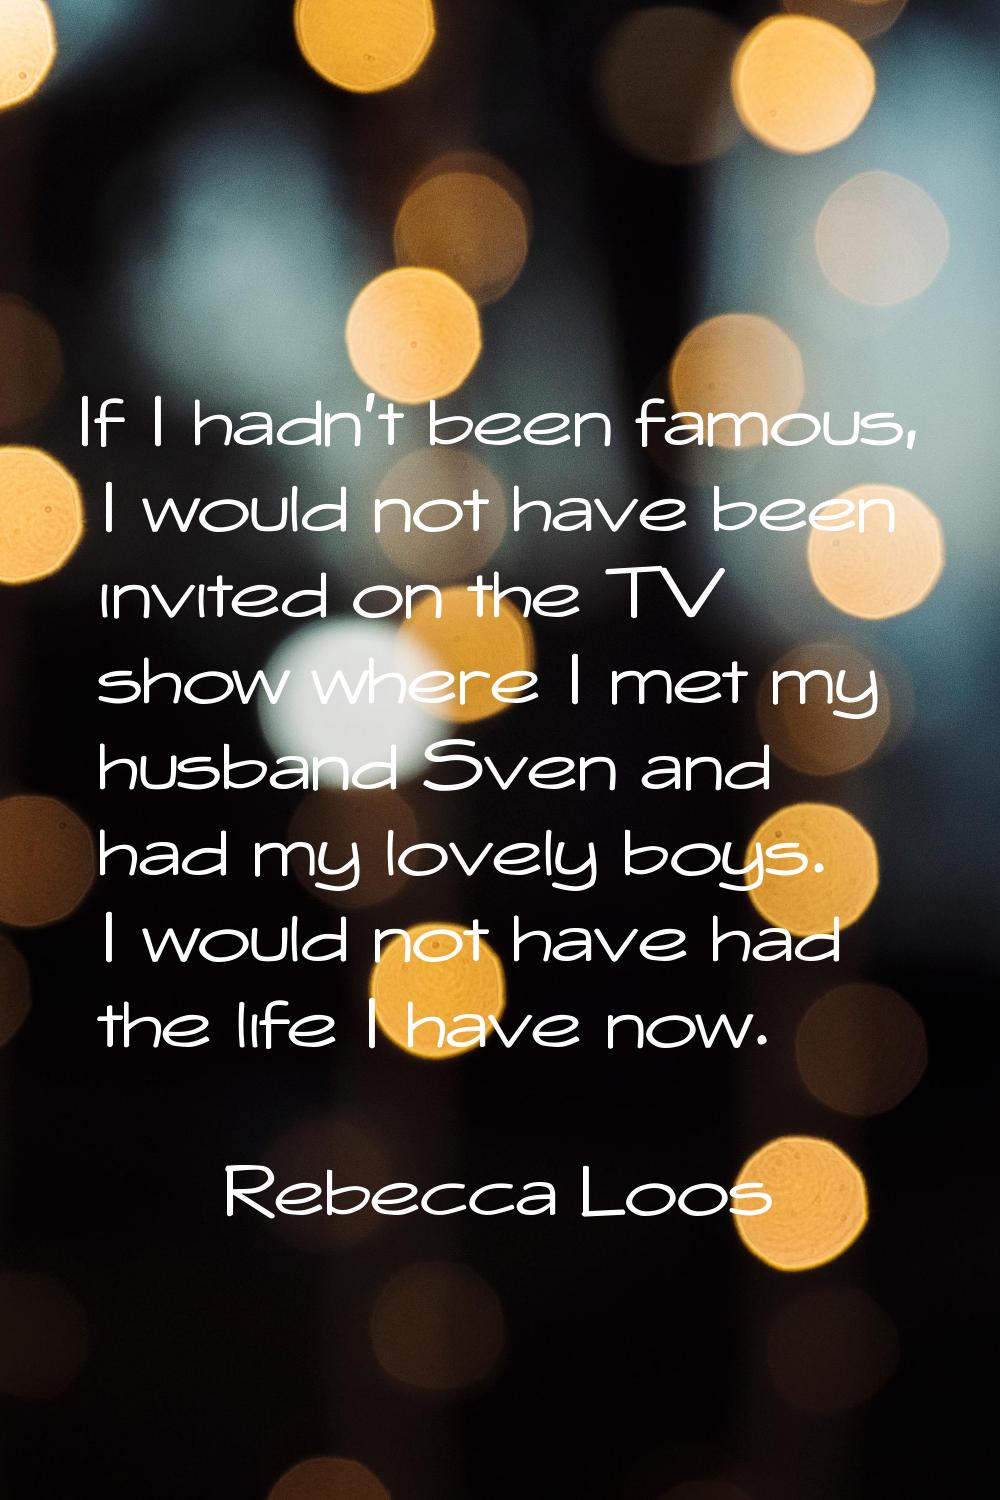 If I hadn't been famous, I would not have been invited on the TV show where I met my husband Sven a